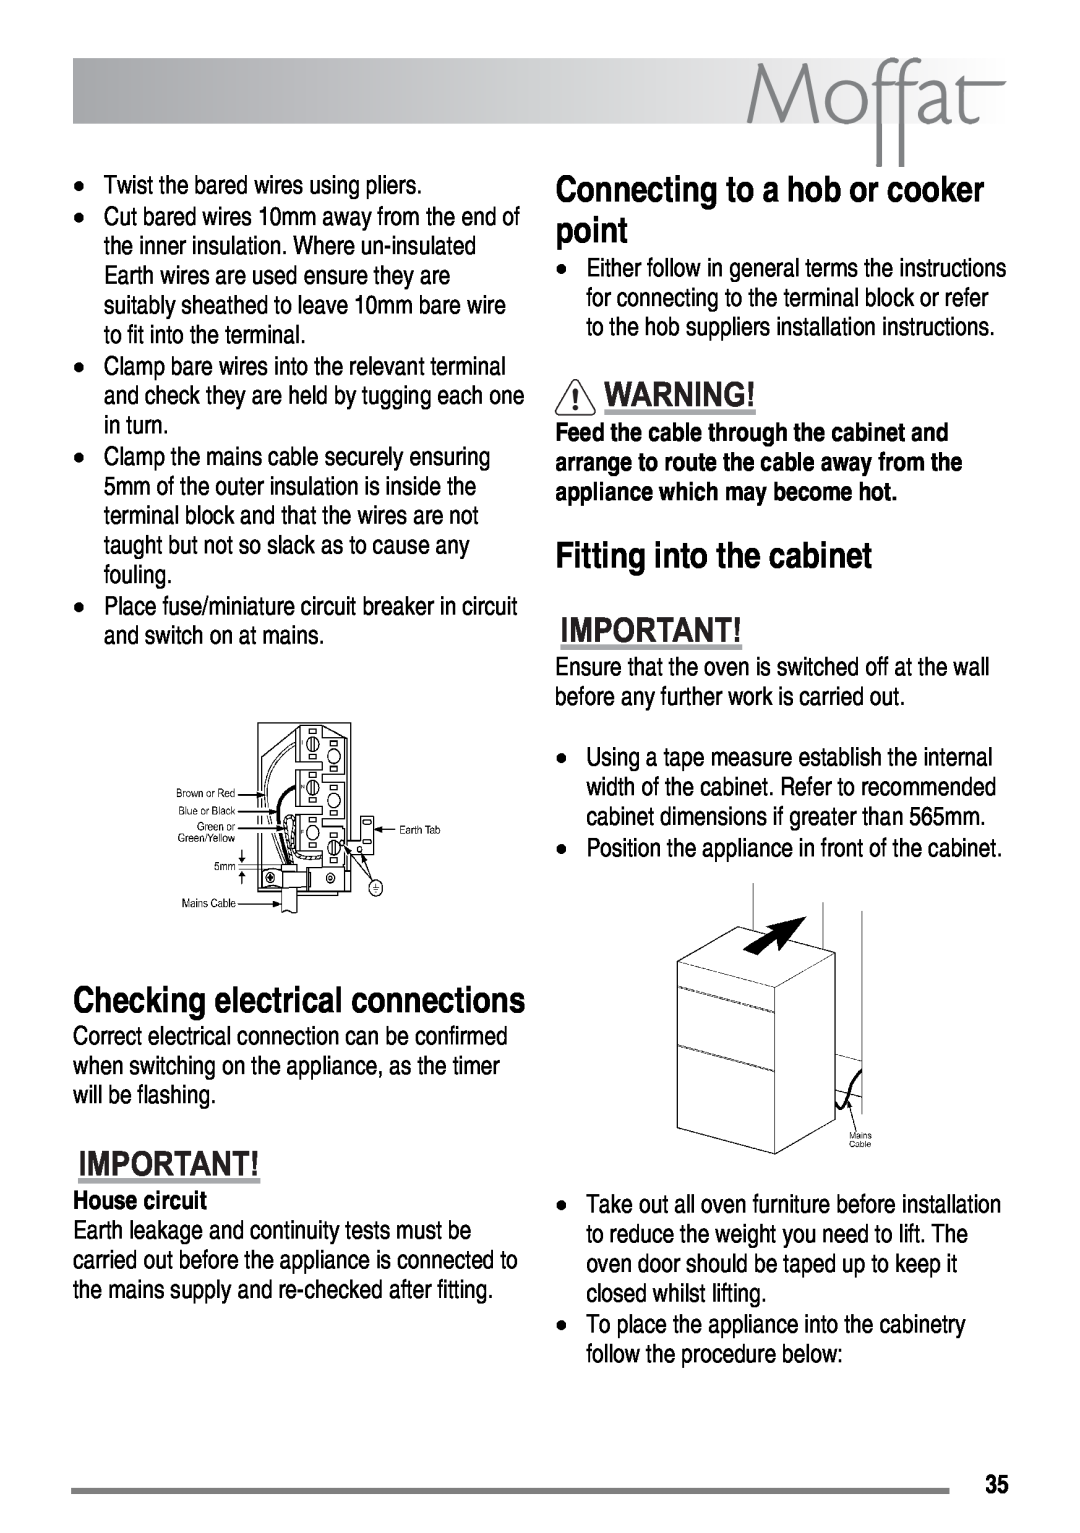 Moffat MDB900 user manual Connecting to a hob or cooker point, Fitting into the cabinet, Checking electrical connections 